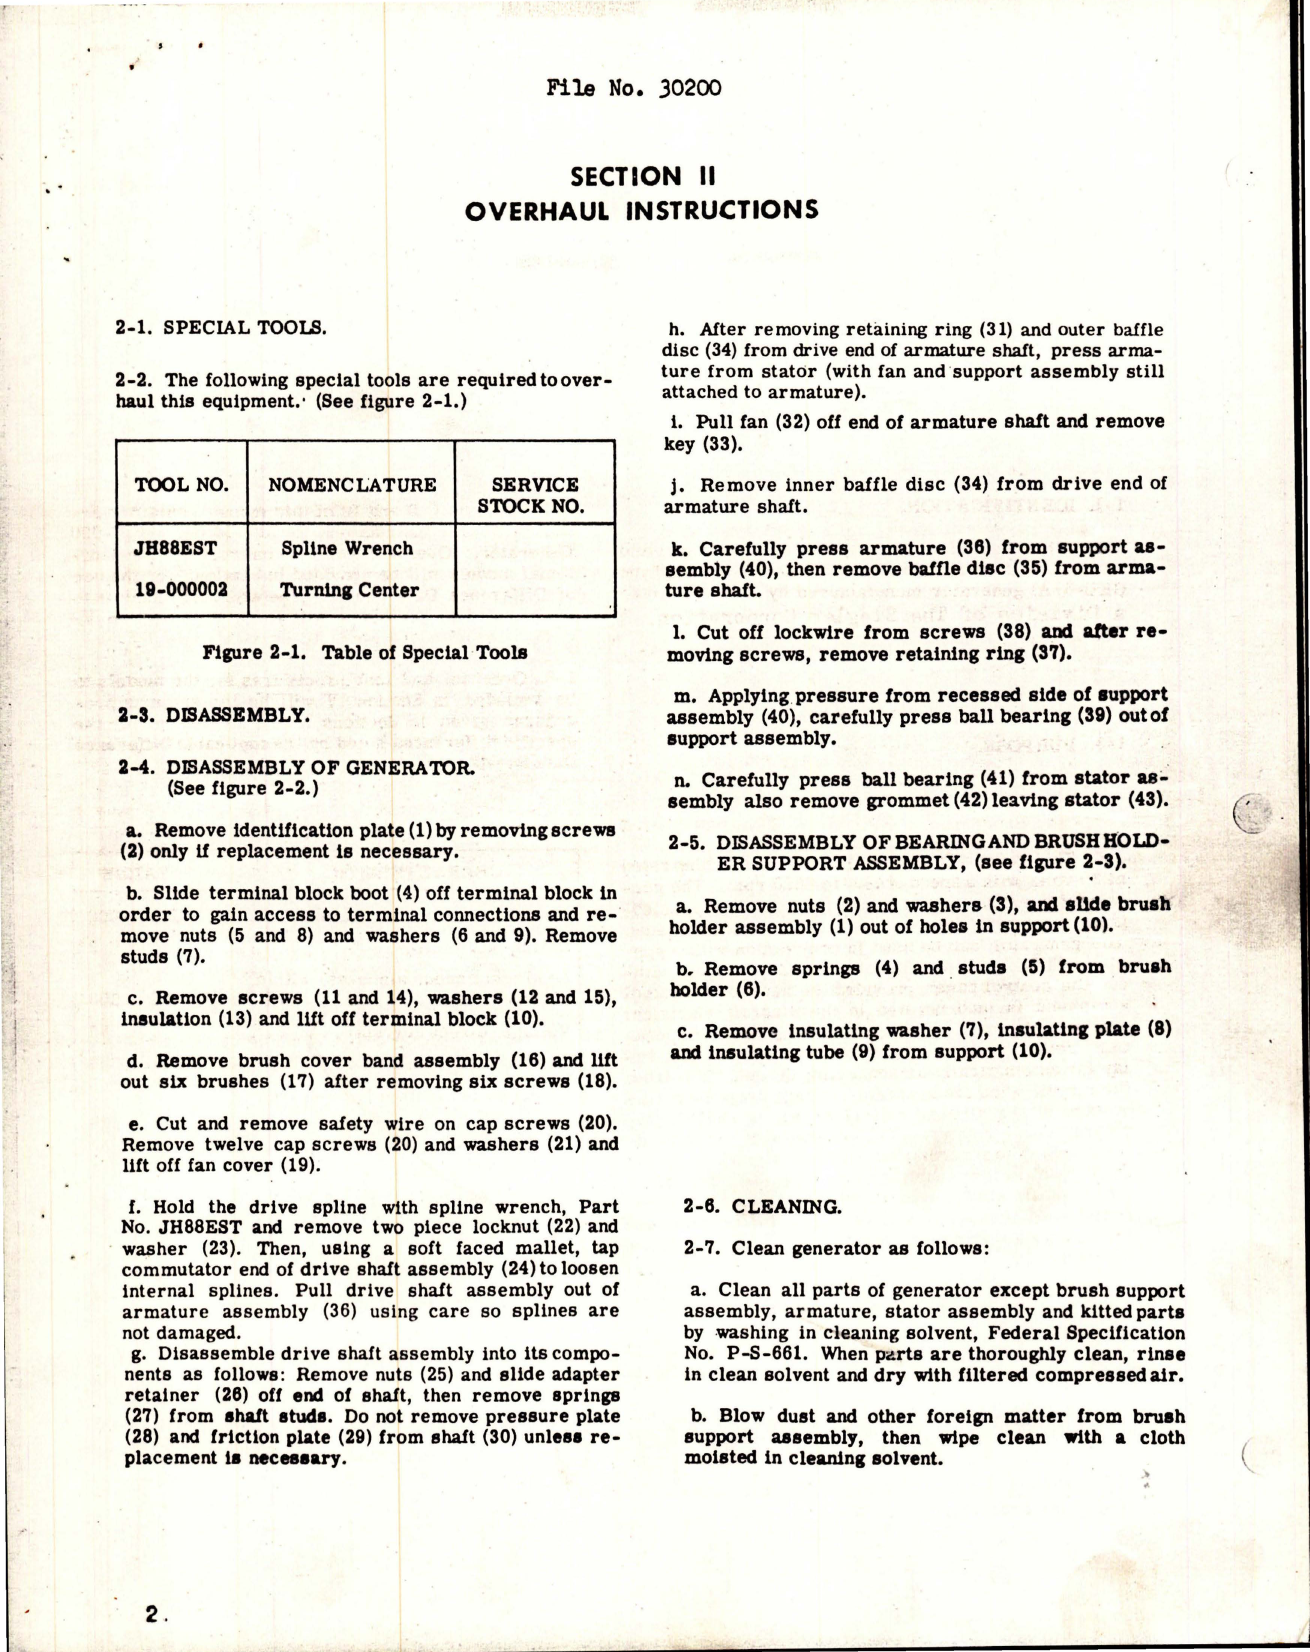 Sample page 7 from AirCorps Library document: Overhaul Instructions with Parts for Generator - Model 30010-000 